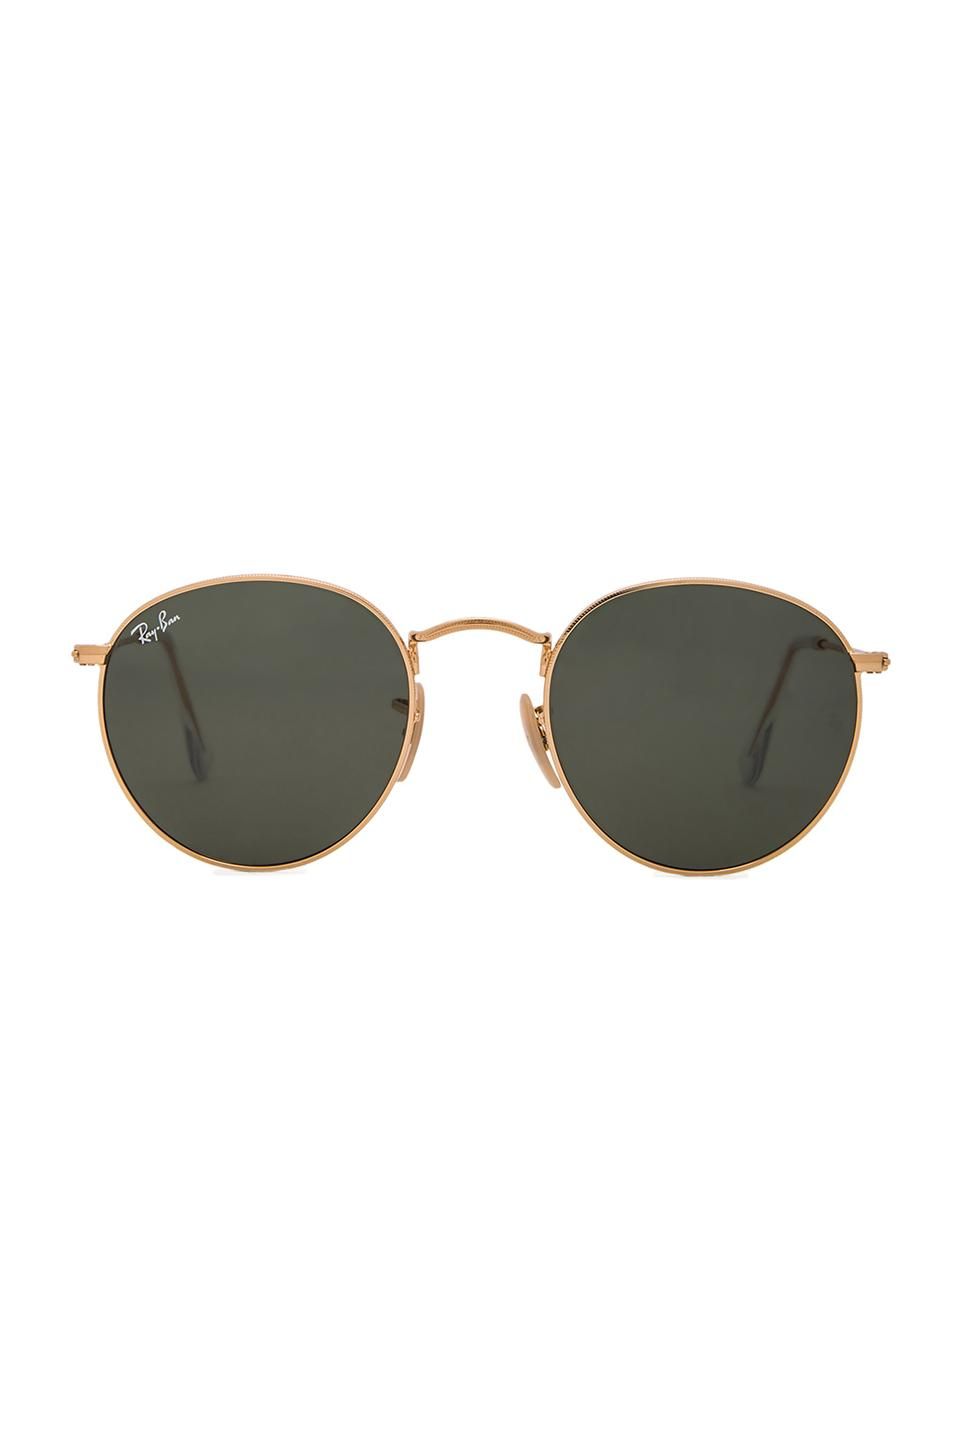 Ray-Ban Round Metal in Green Classic